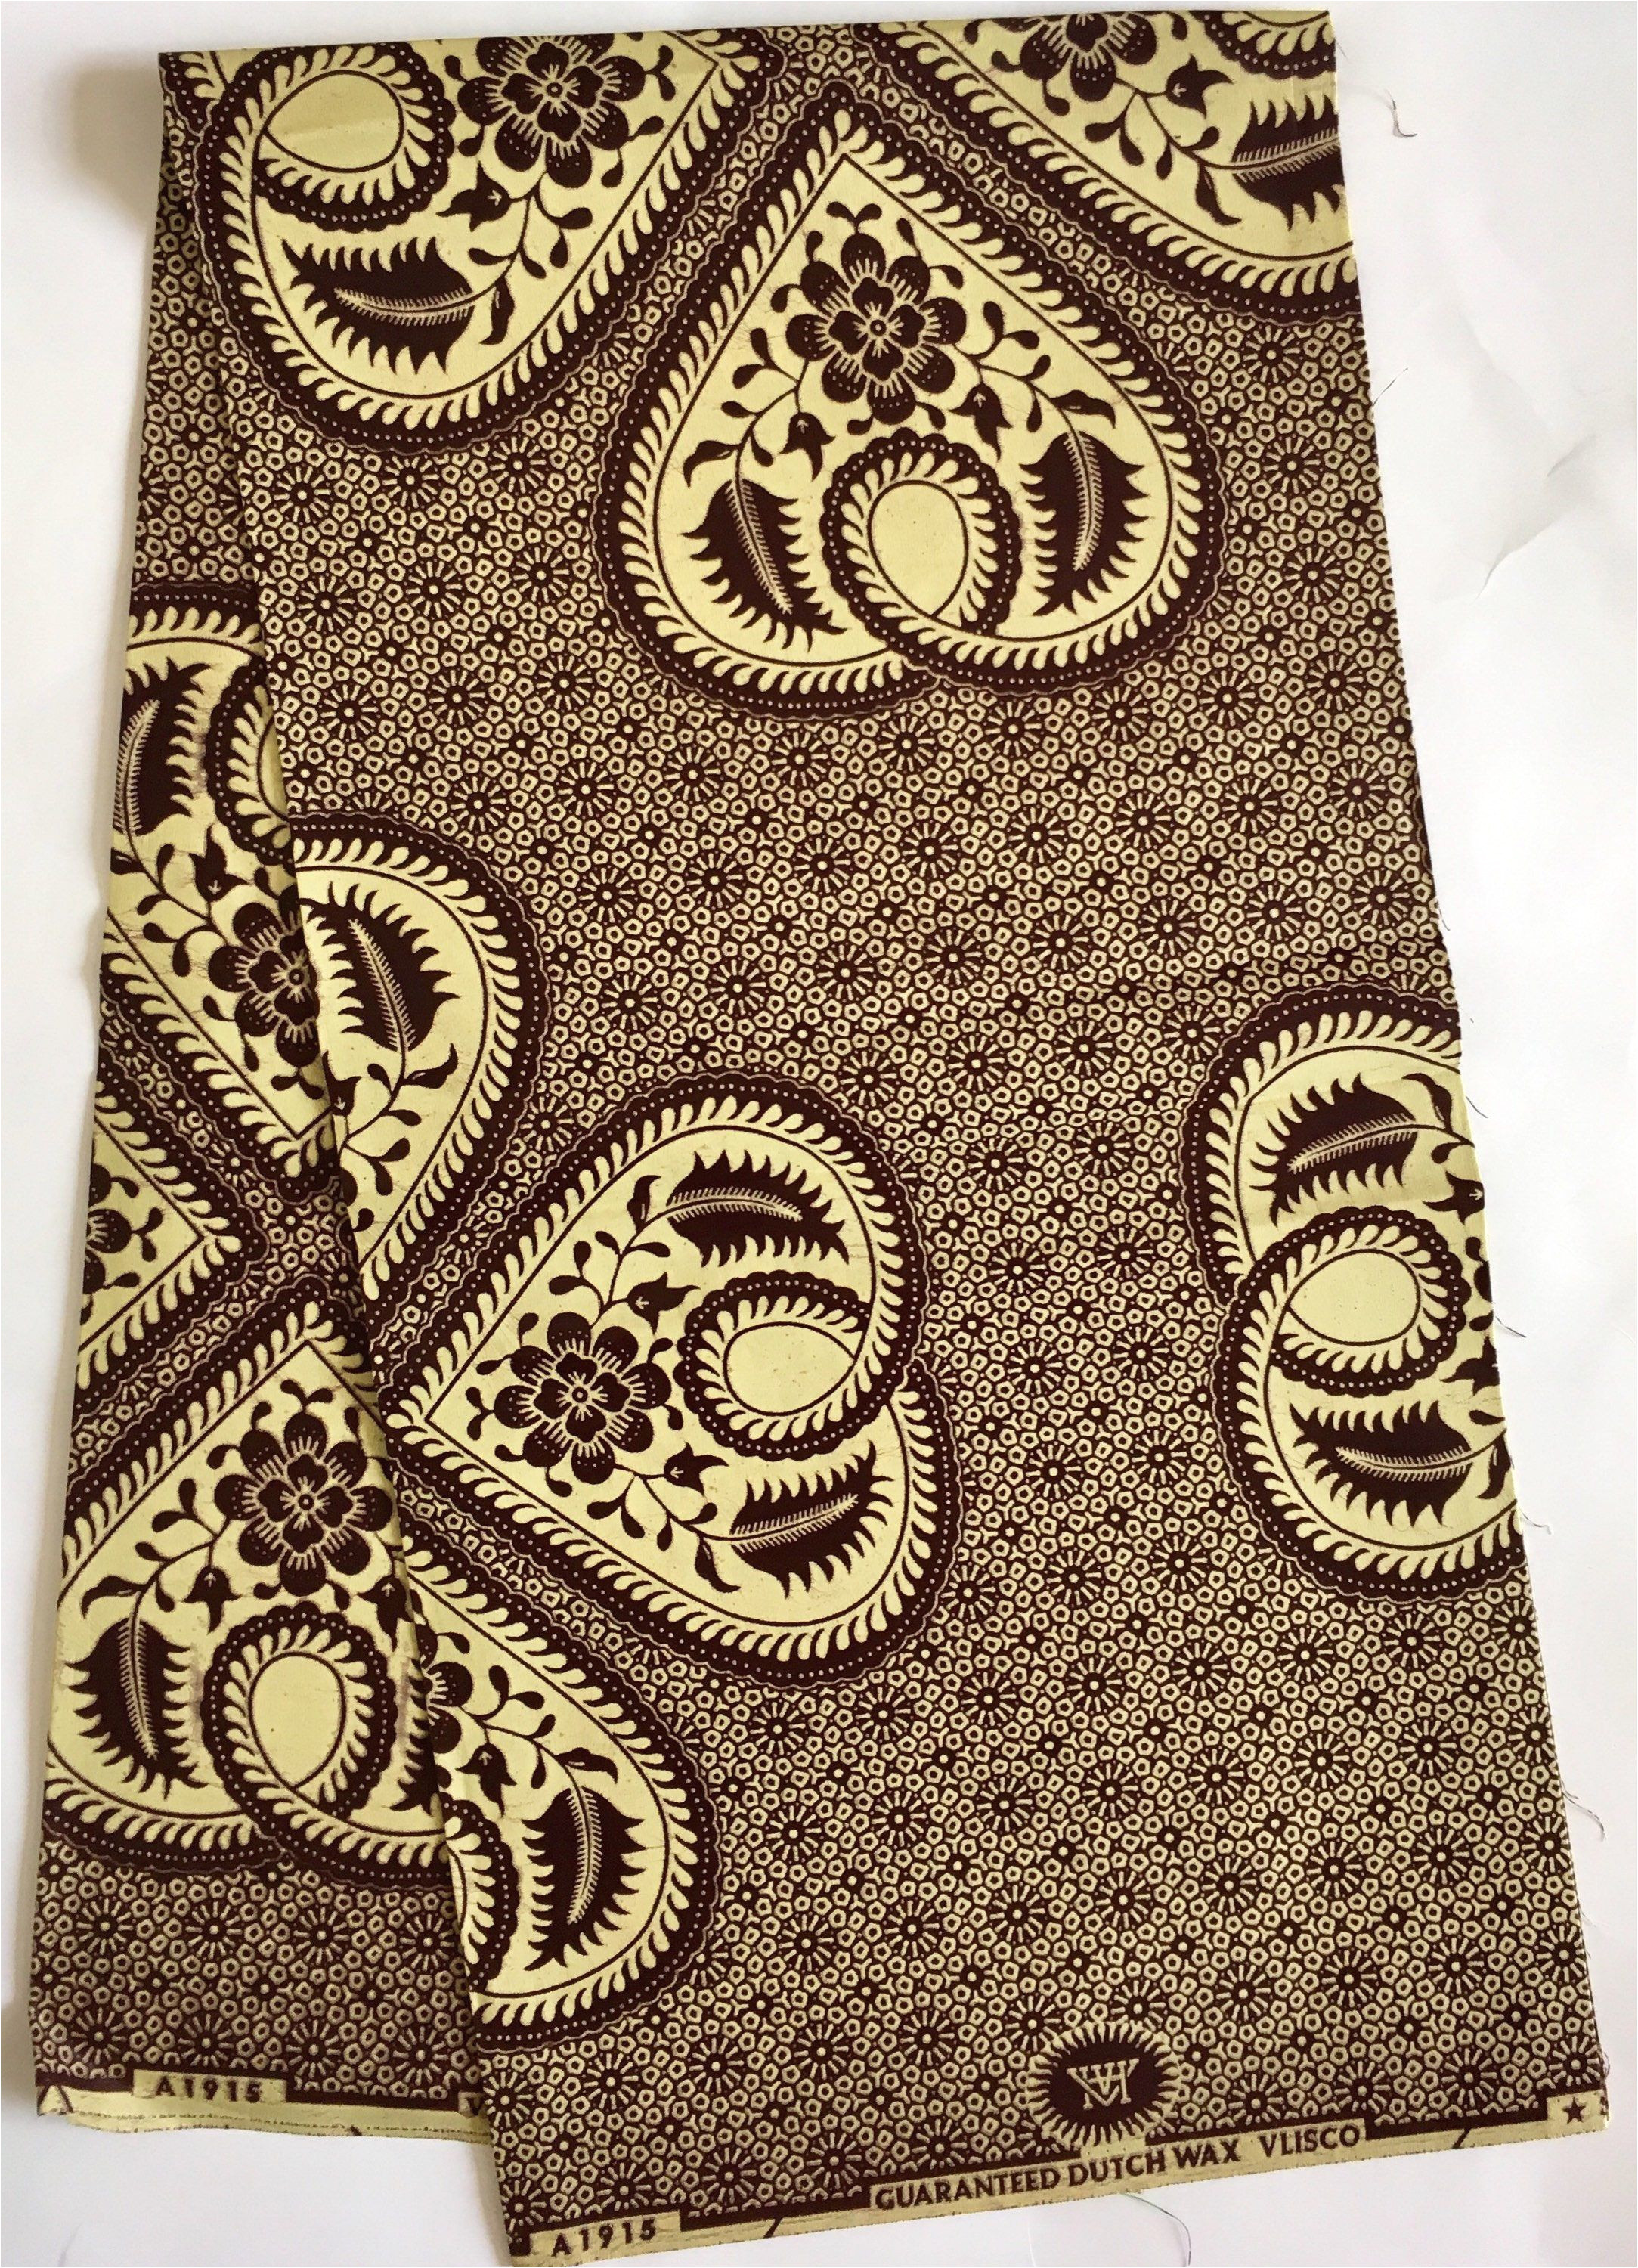 mudcloth fabric by the yard house of mami wata african print fabrics https www etsy com